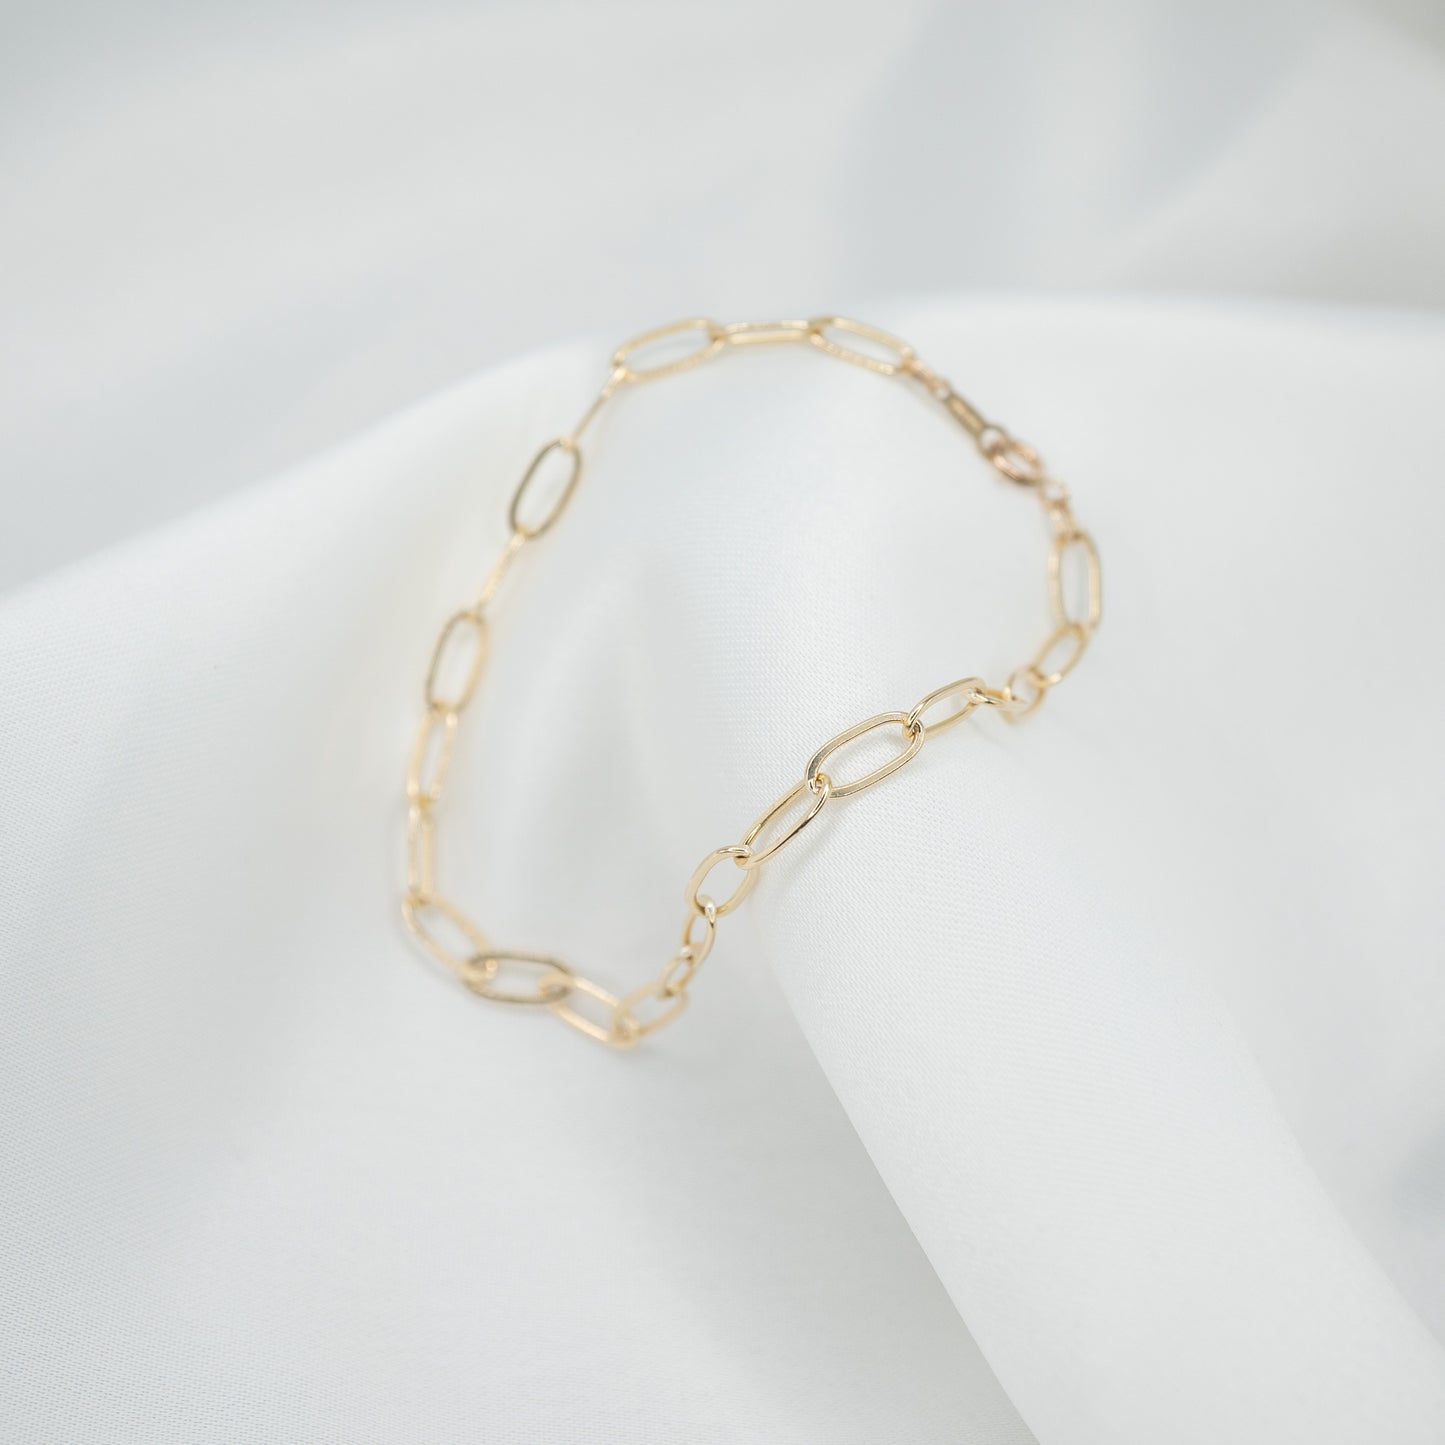 Gold Filled Paperclip Chain Bracelet - draped over white cloth